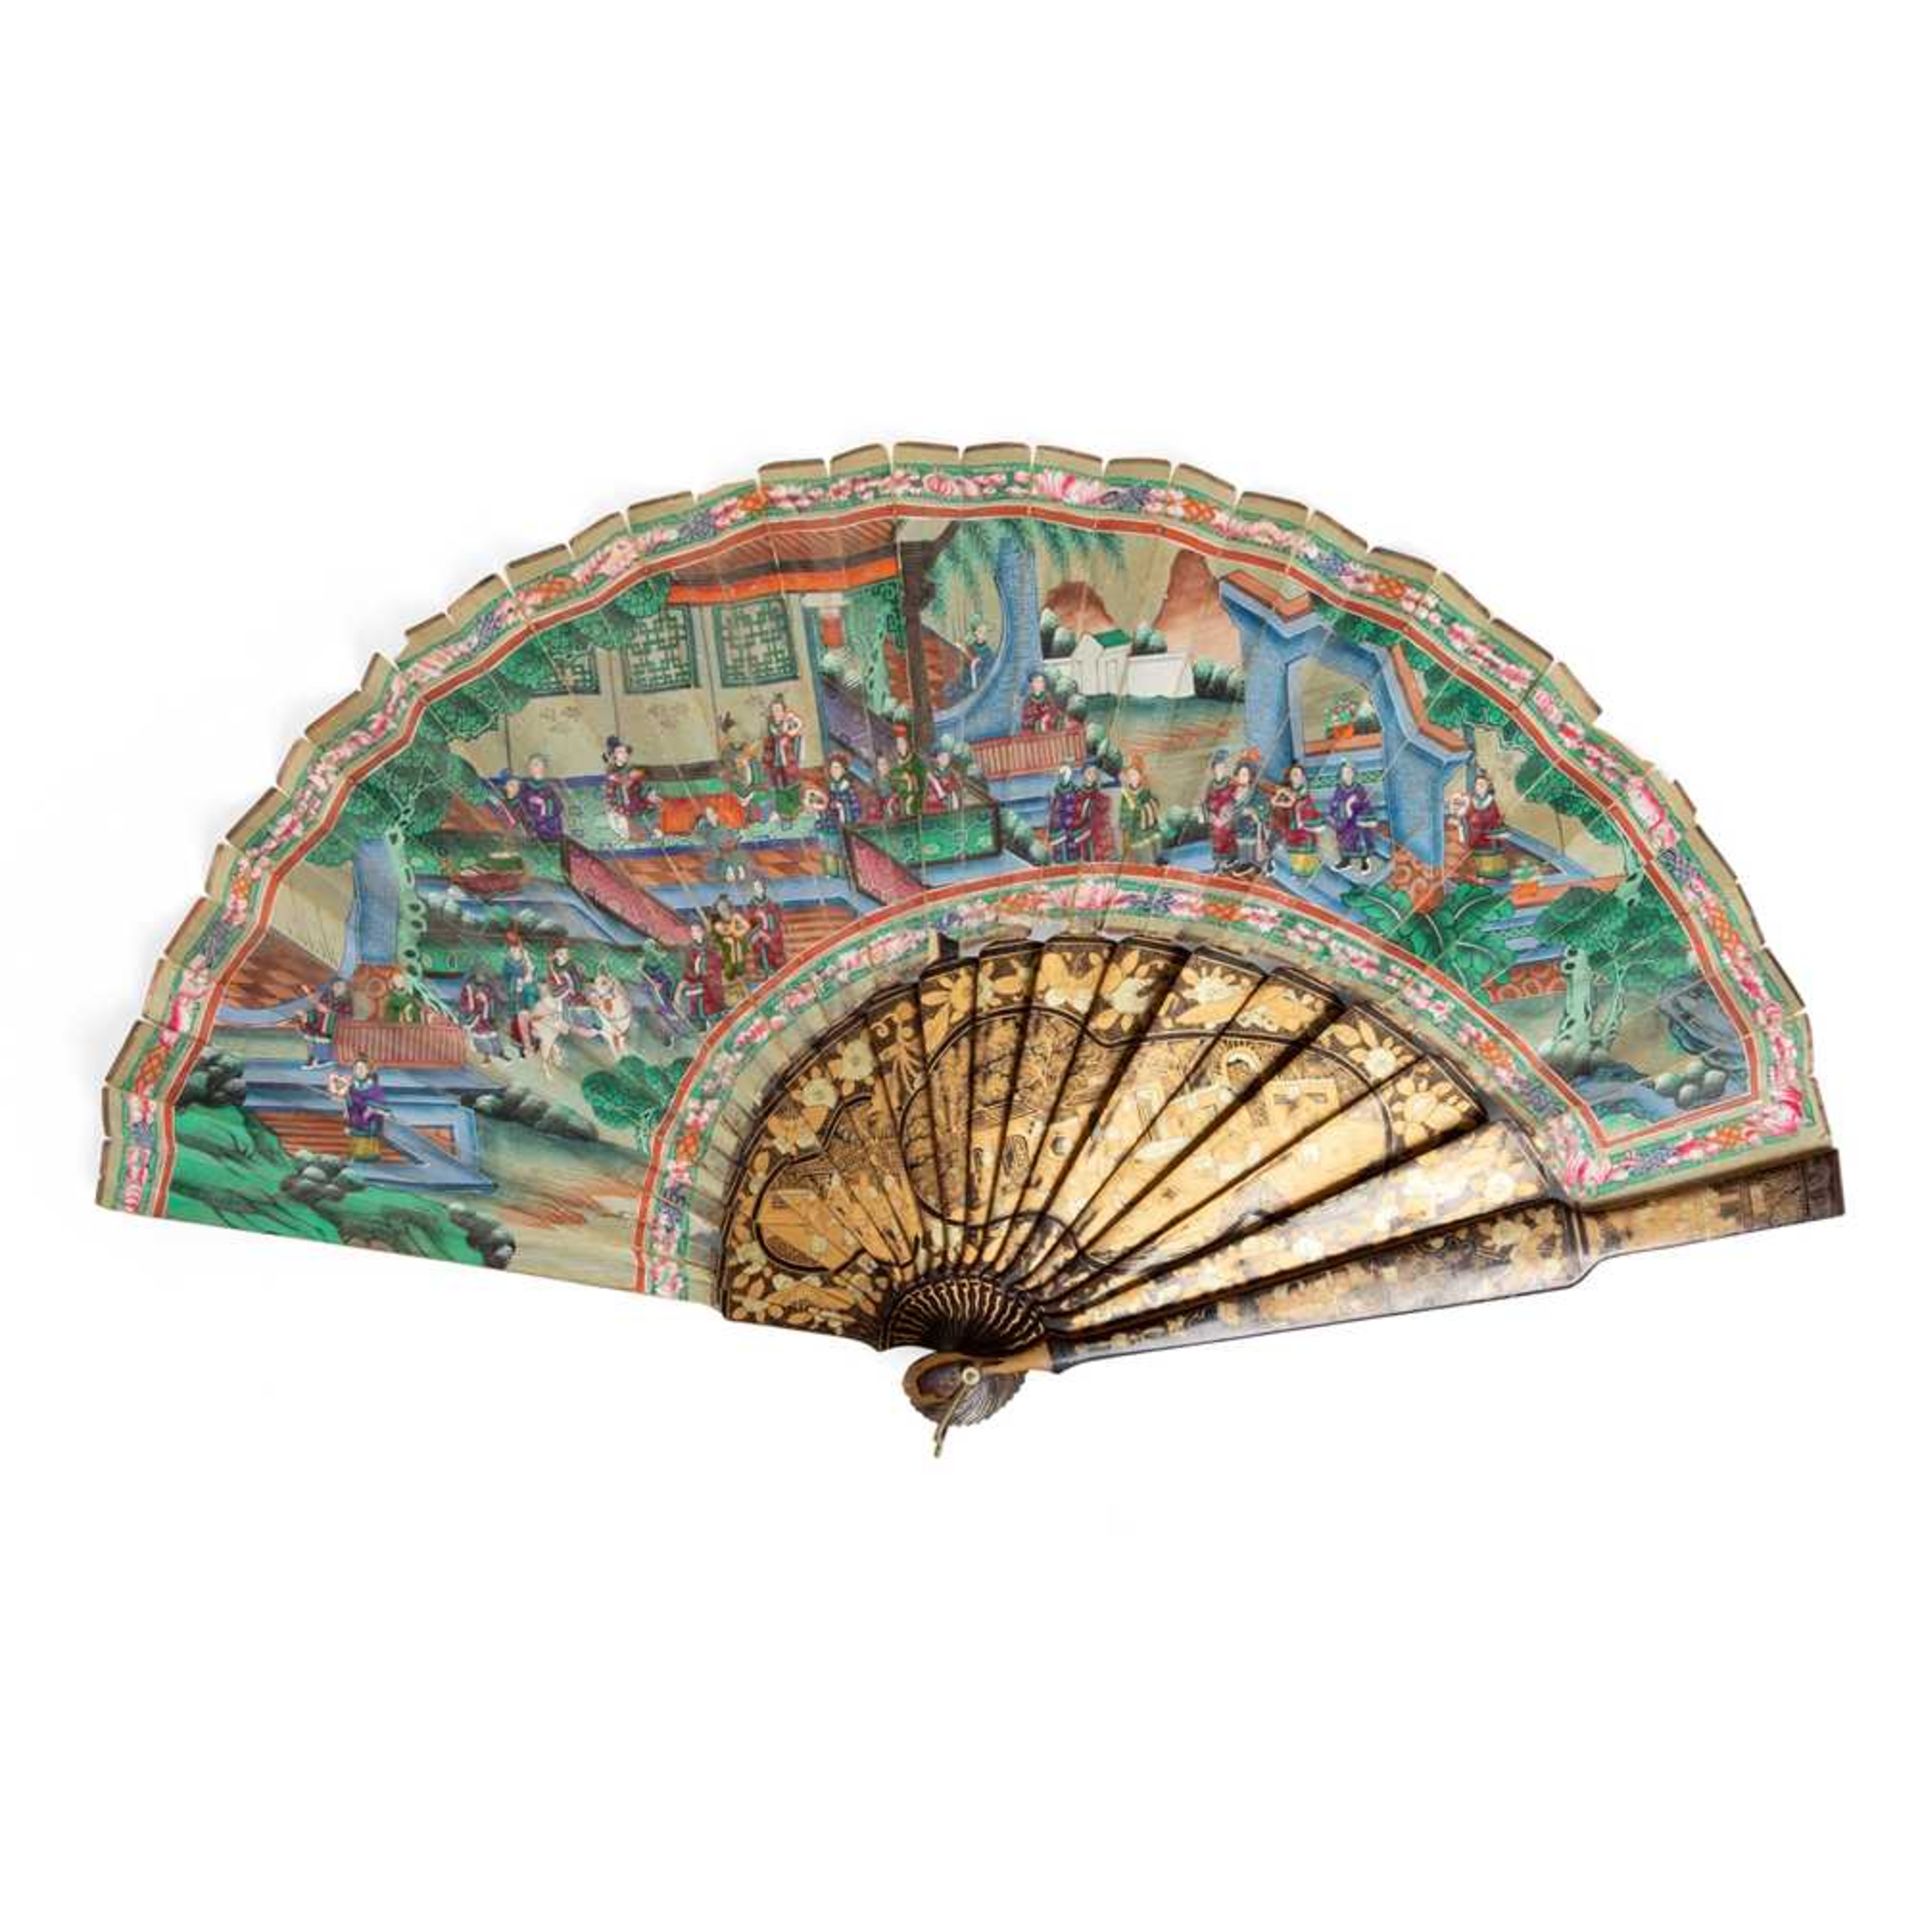 CANTON LACQUERED AND PAPER 'BIRDS AND FLOWERS' ARTICULATED FAN QING DYNASTY, MID-19TH CENTURY